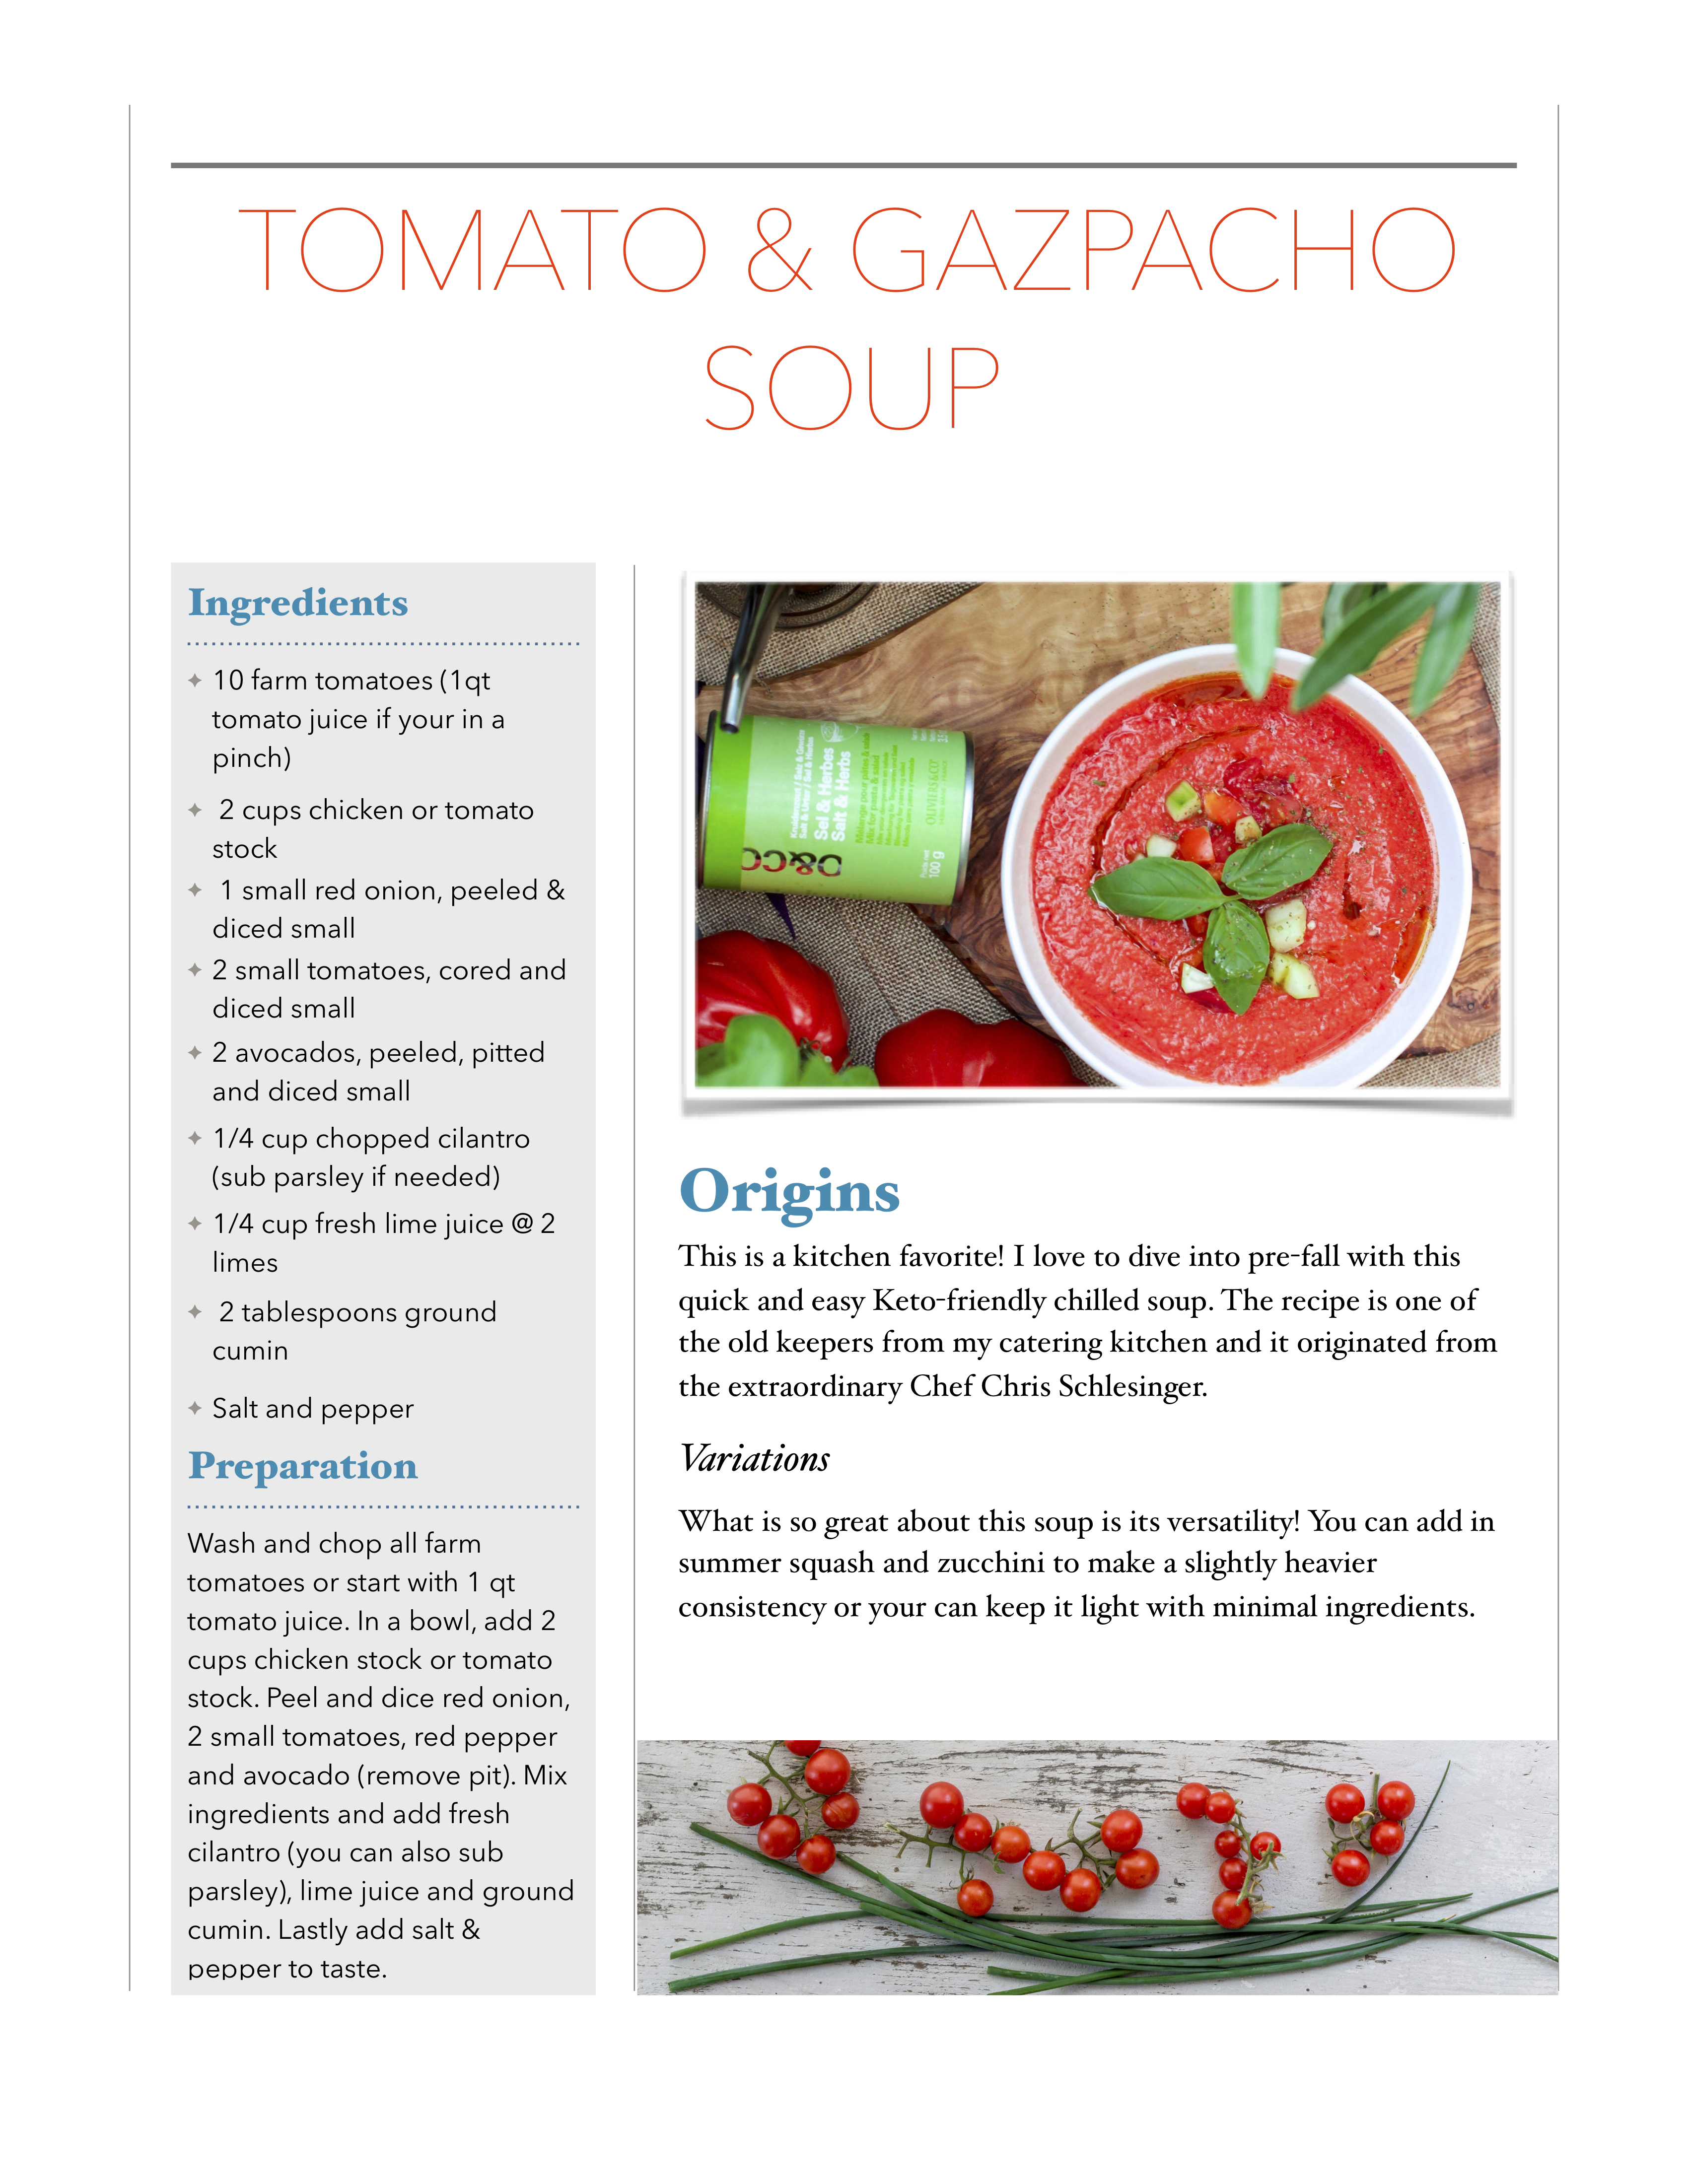 Tomato Newsletter_pages_JPEG Tomatoes correction